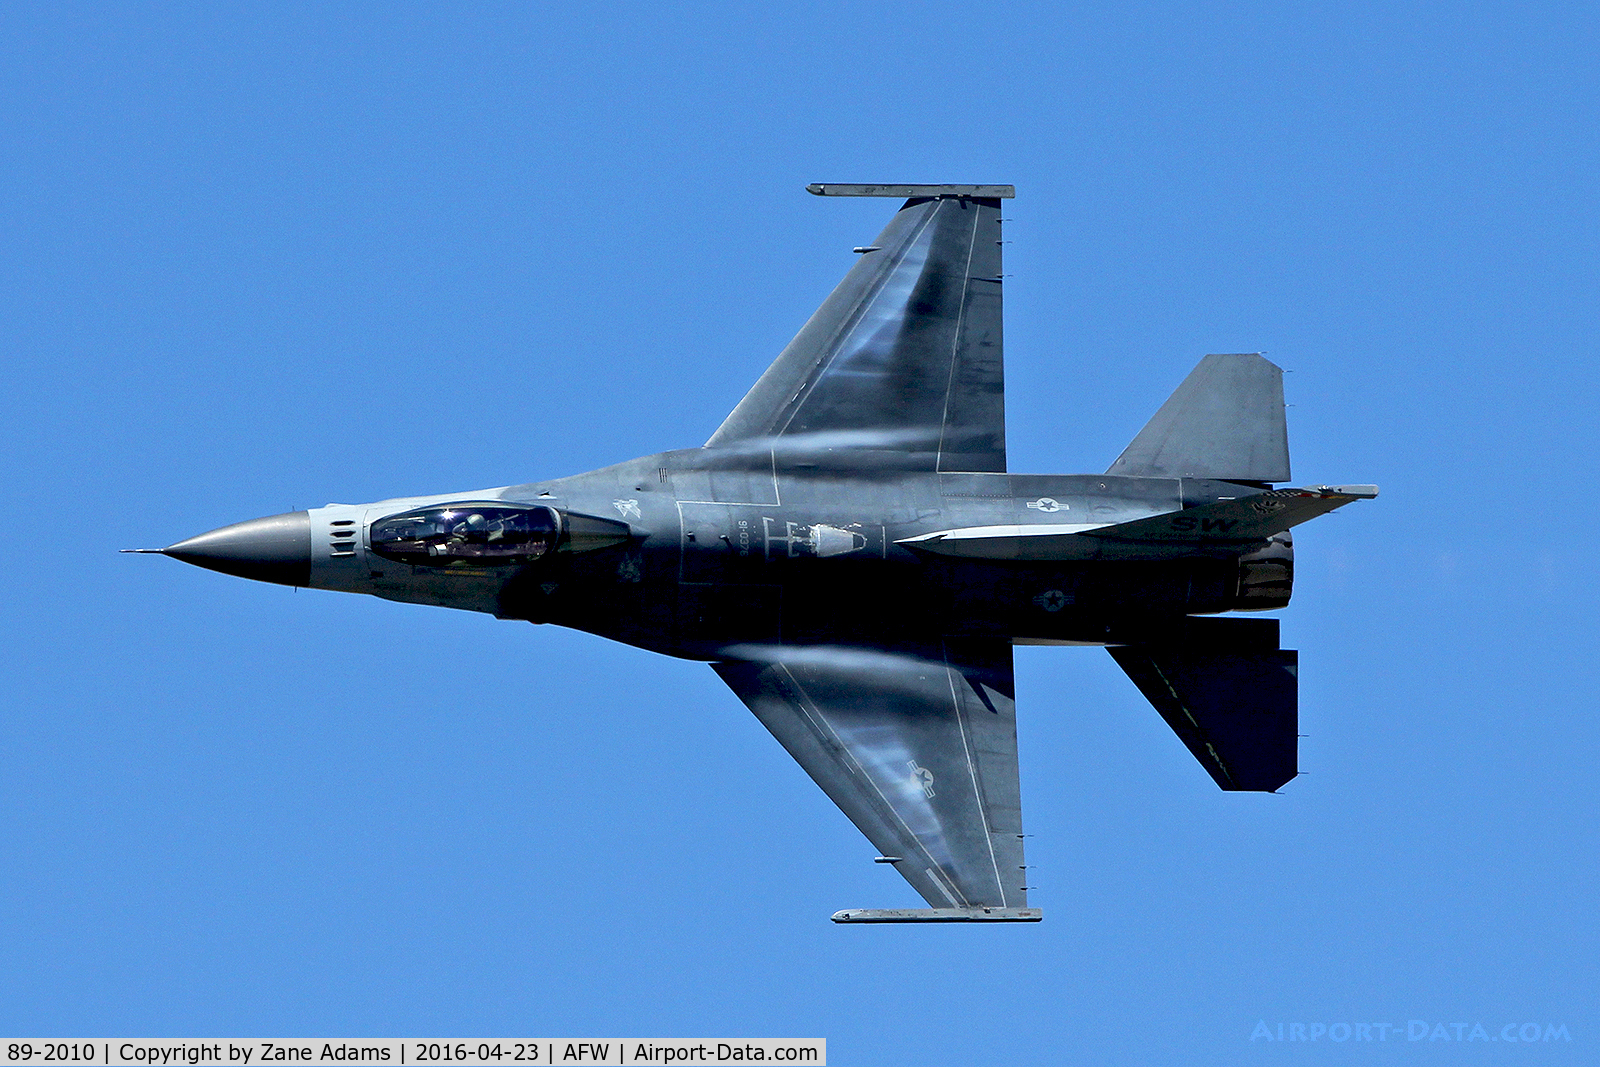 89-2010, 1989 General Dynamics F-16CM Fighting Falcon C/N 1C-163, At the 2016 Alliance Airshow